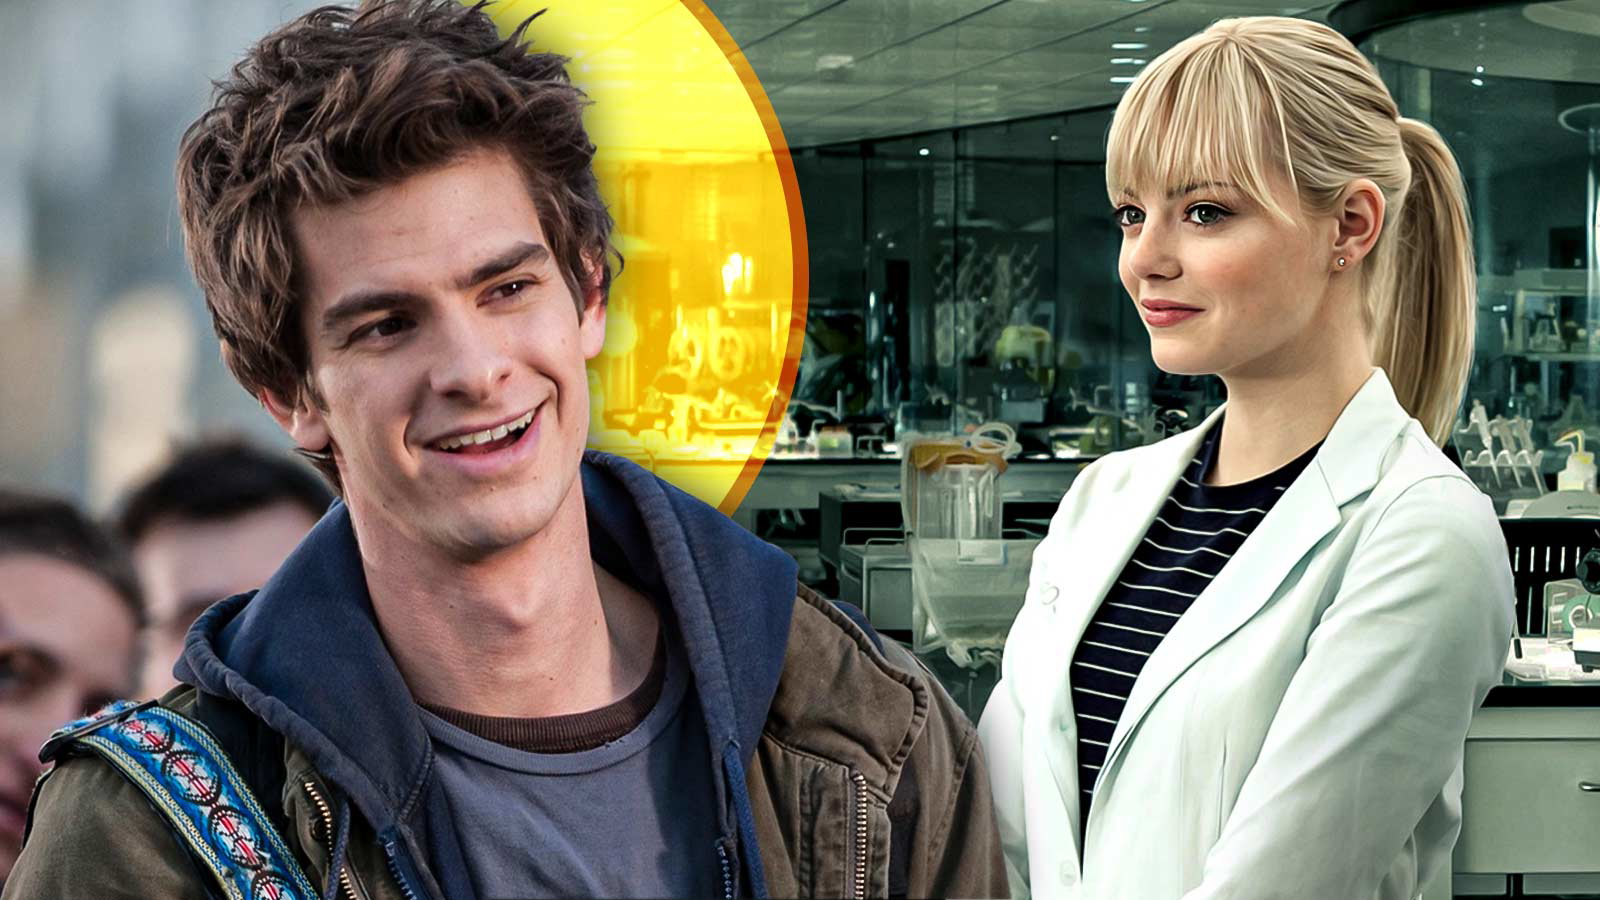 “Whenever we have time, we’re together”: Andrew Garfield Openly Talking About His 1st Girlfriend Before Failed Romance With Emma Stone Reveals How Much He Changed